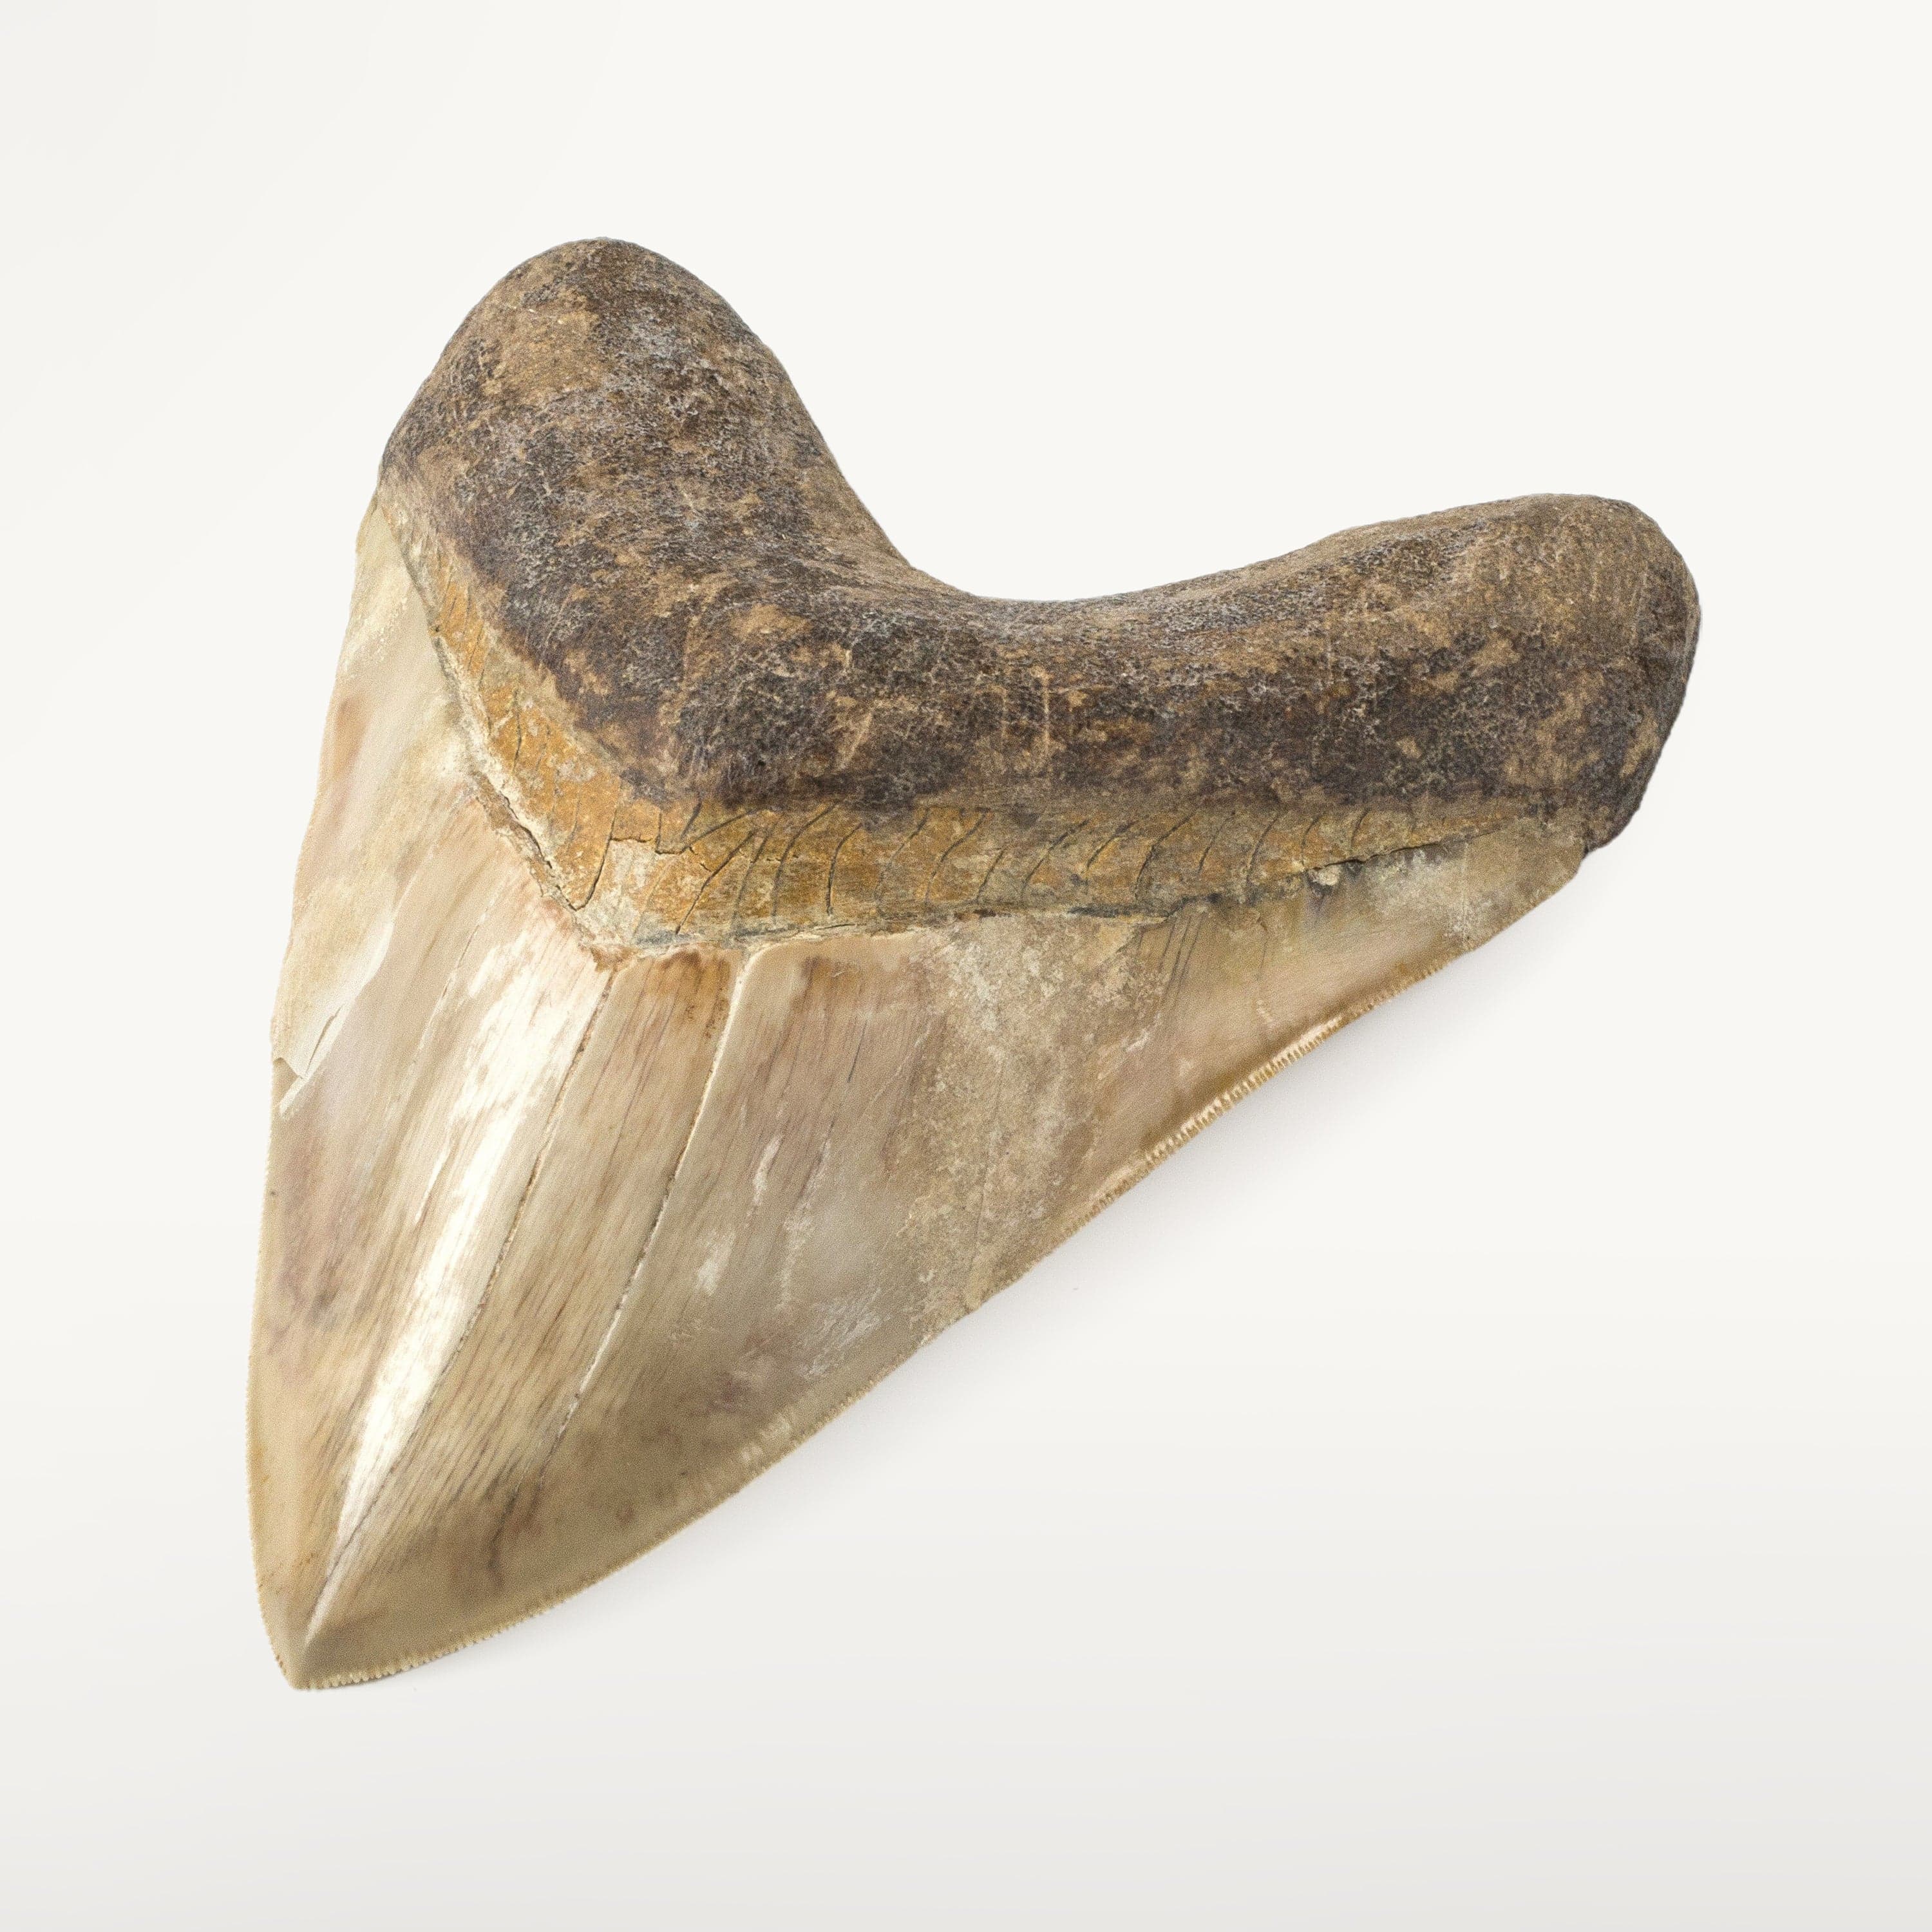 Kalifano Megalodon Teeth Natural Megalodon Tooth from Indonesia - 6.5" ST25000.002